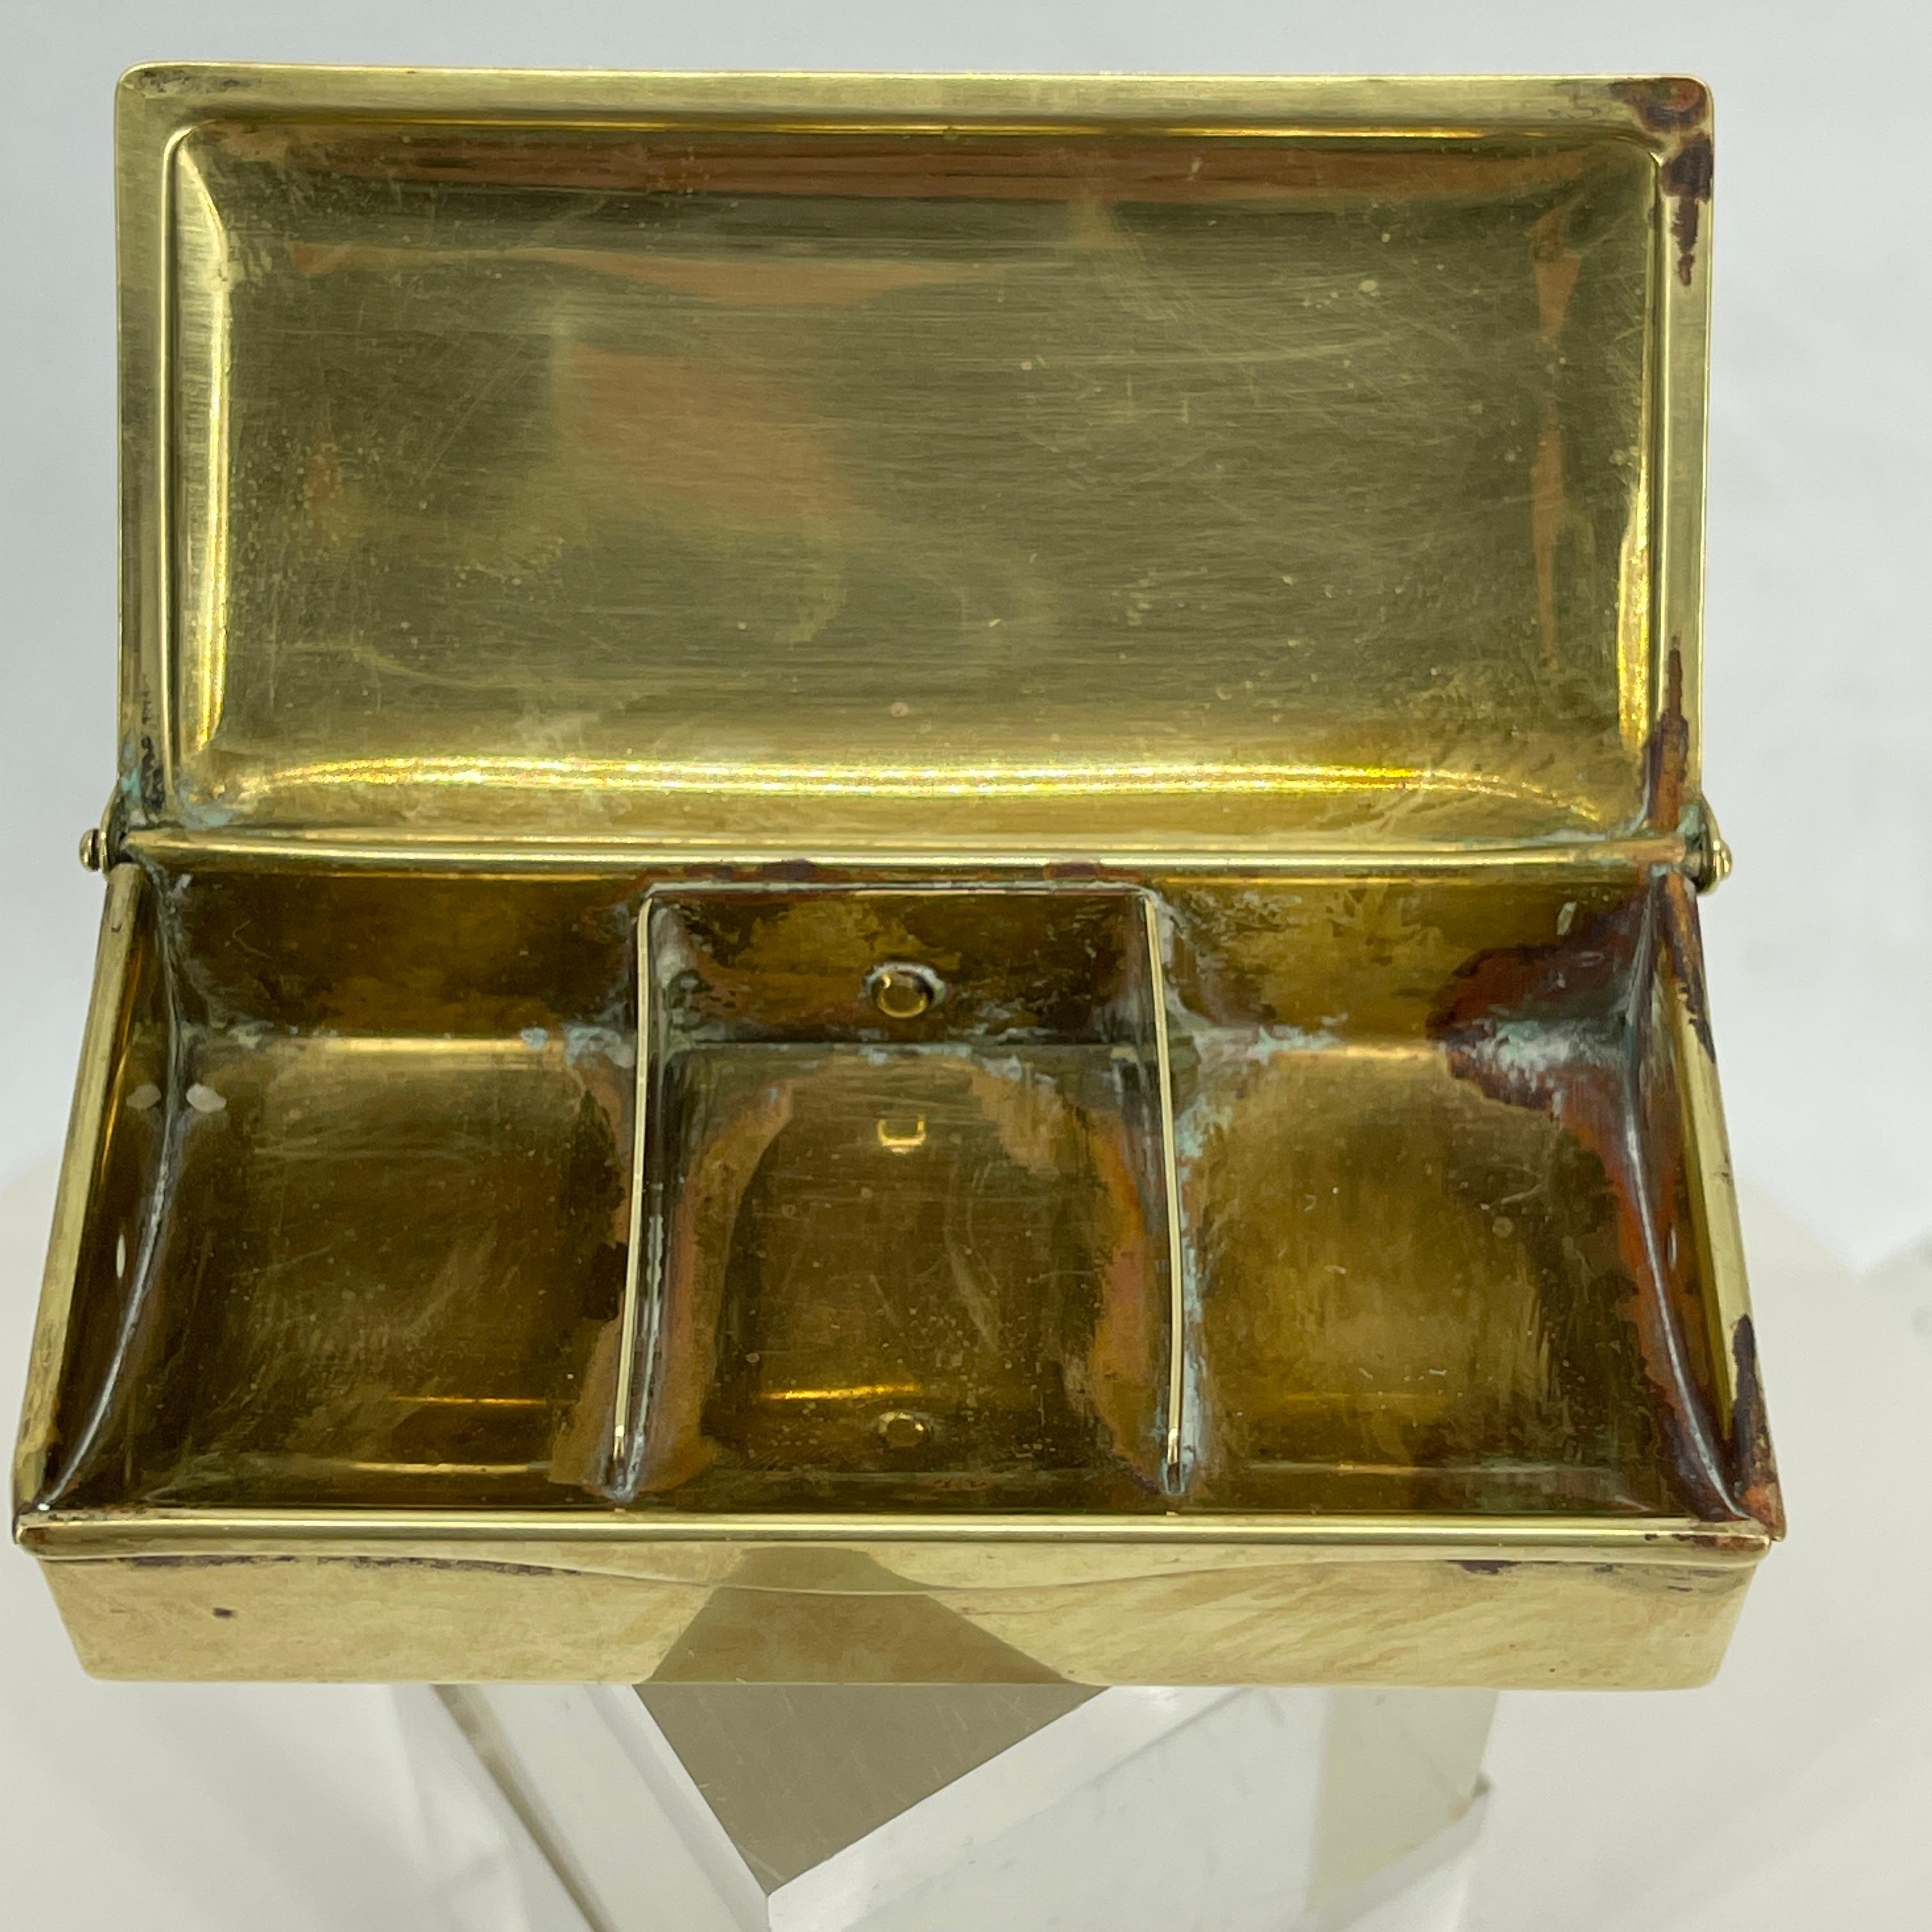 Charming 3 compartments brass stamps storage box. The box is in good working condition and has that warm patina feel, of having tonnes of history behind it.
The box can also be used for rings and pendants.
Marked GES.GESCH AUSTRIA.